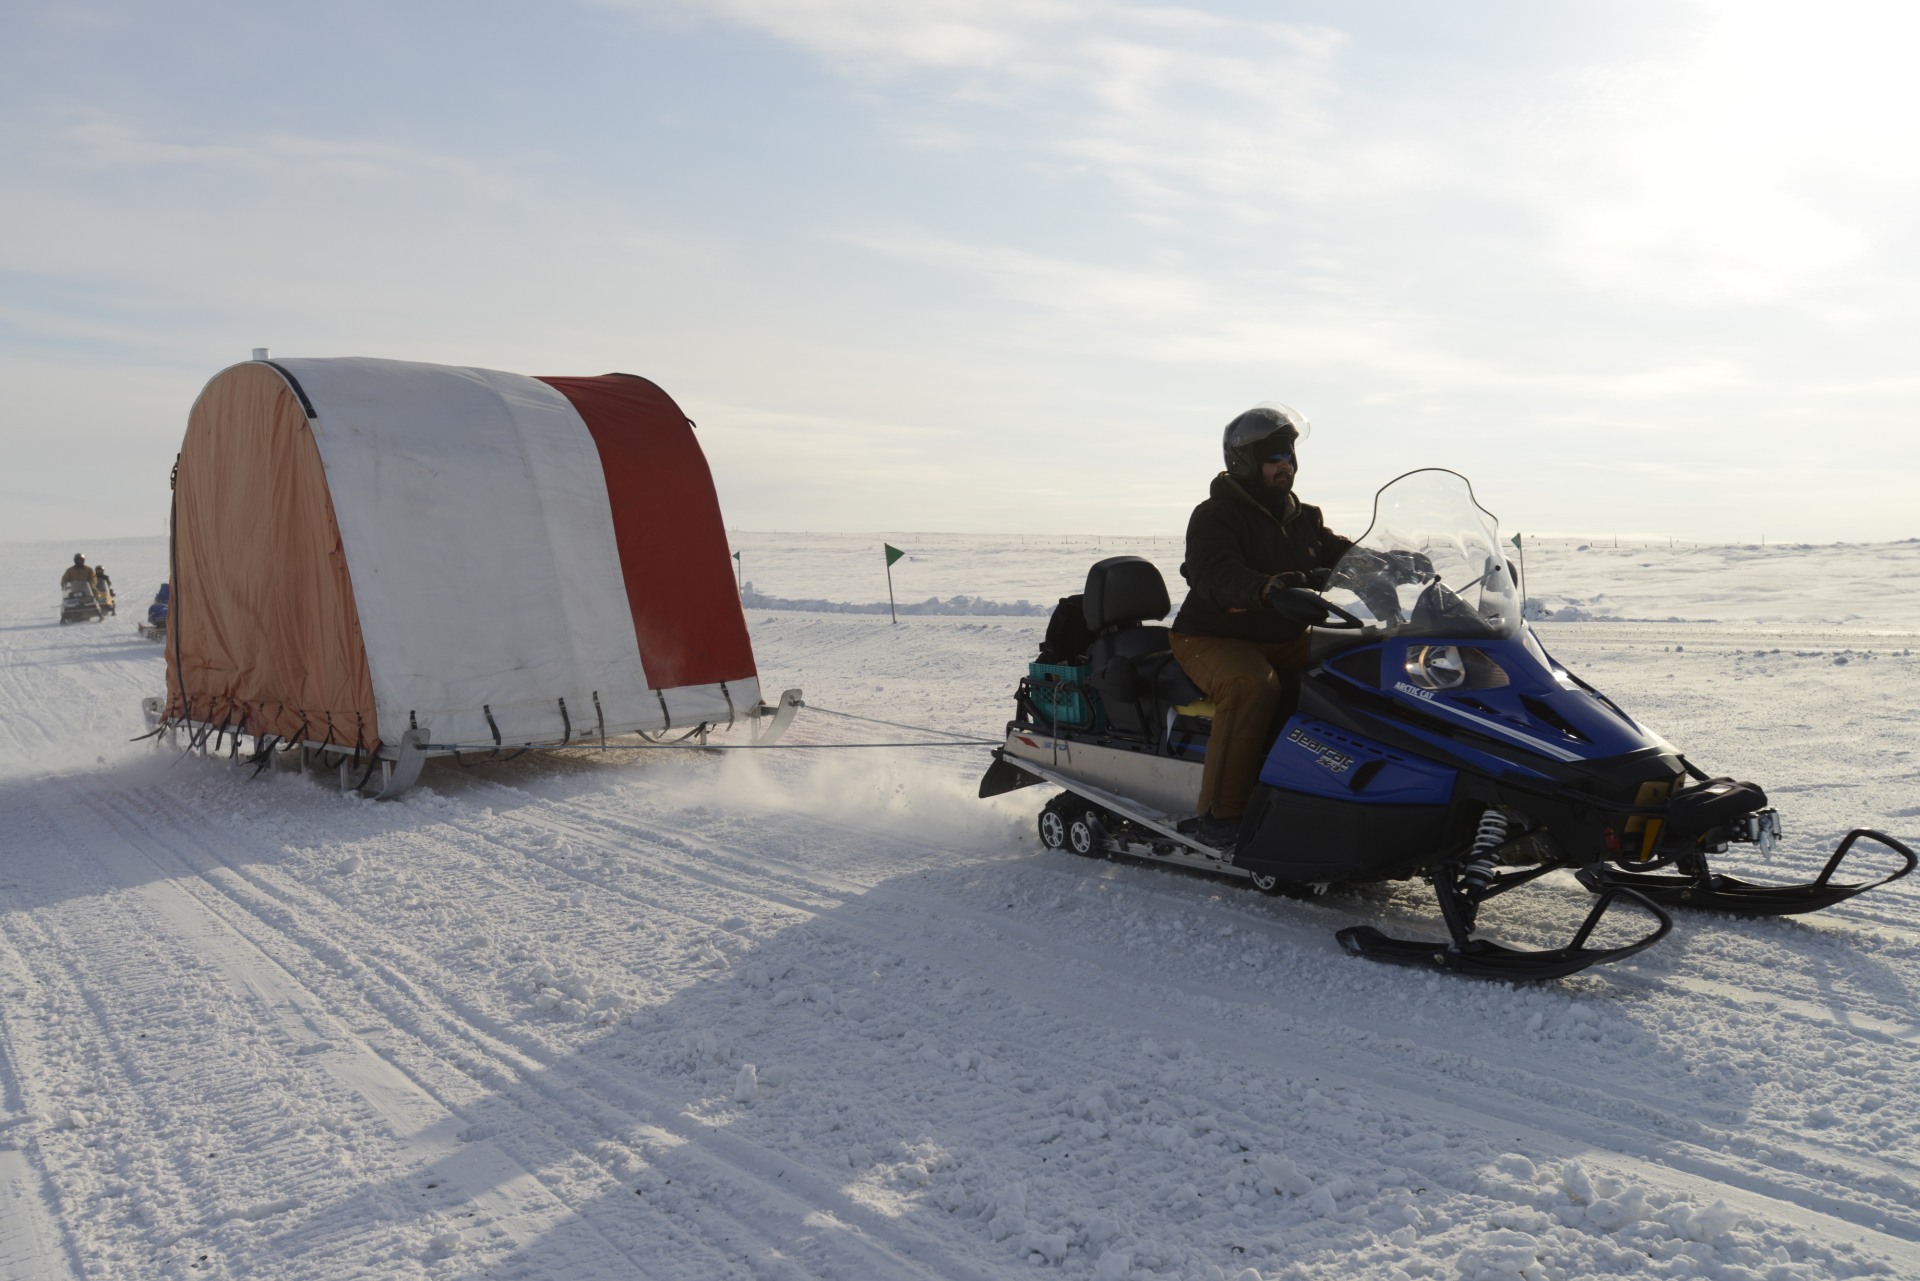 The best tent for the Arctic is a tent on a sled.
Photo by Janice Lang, DRDC